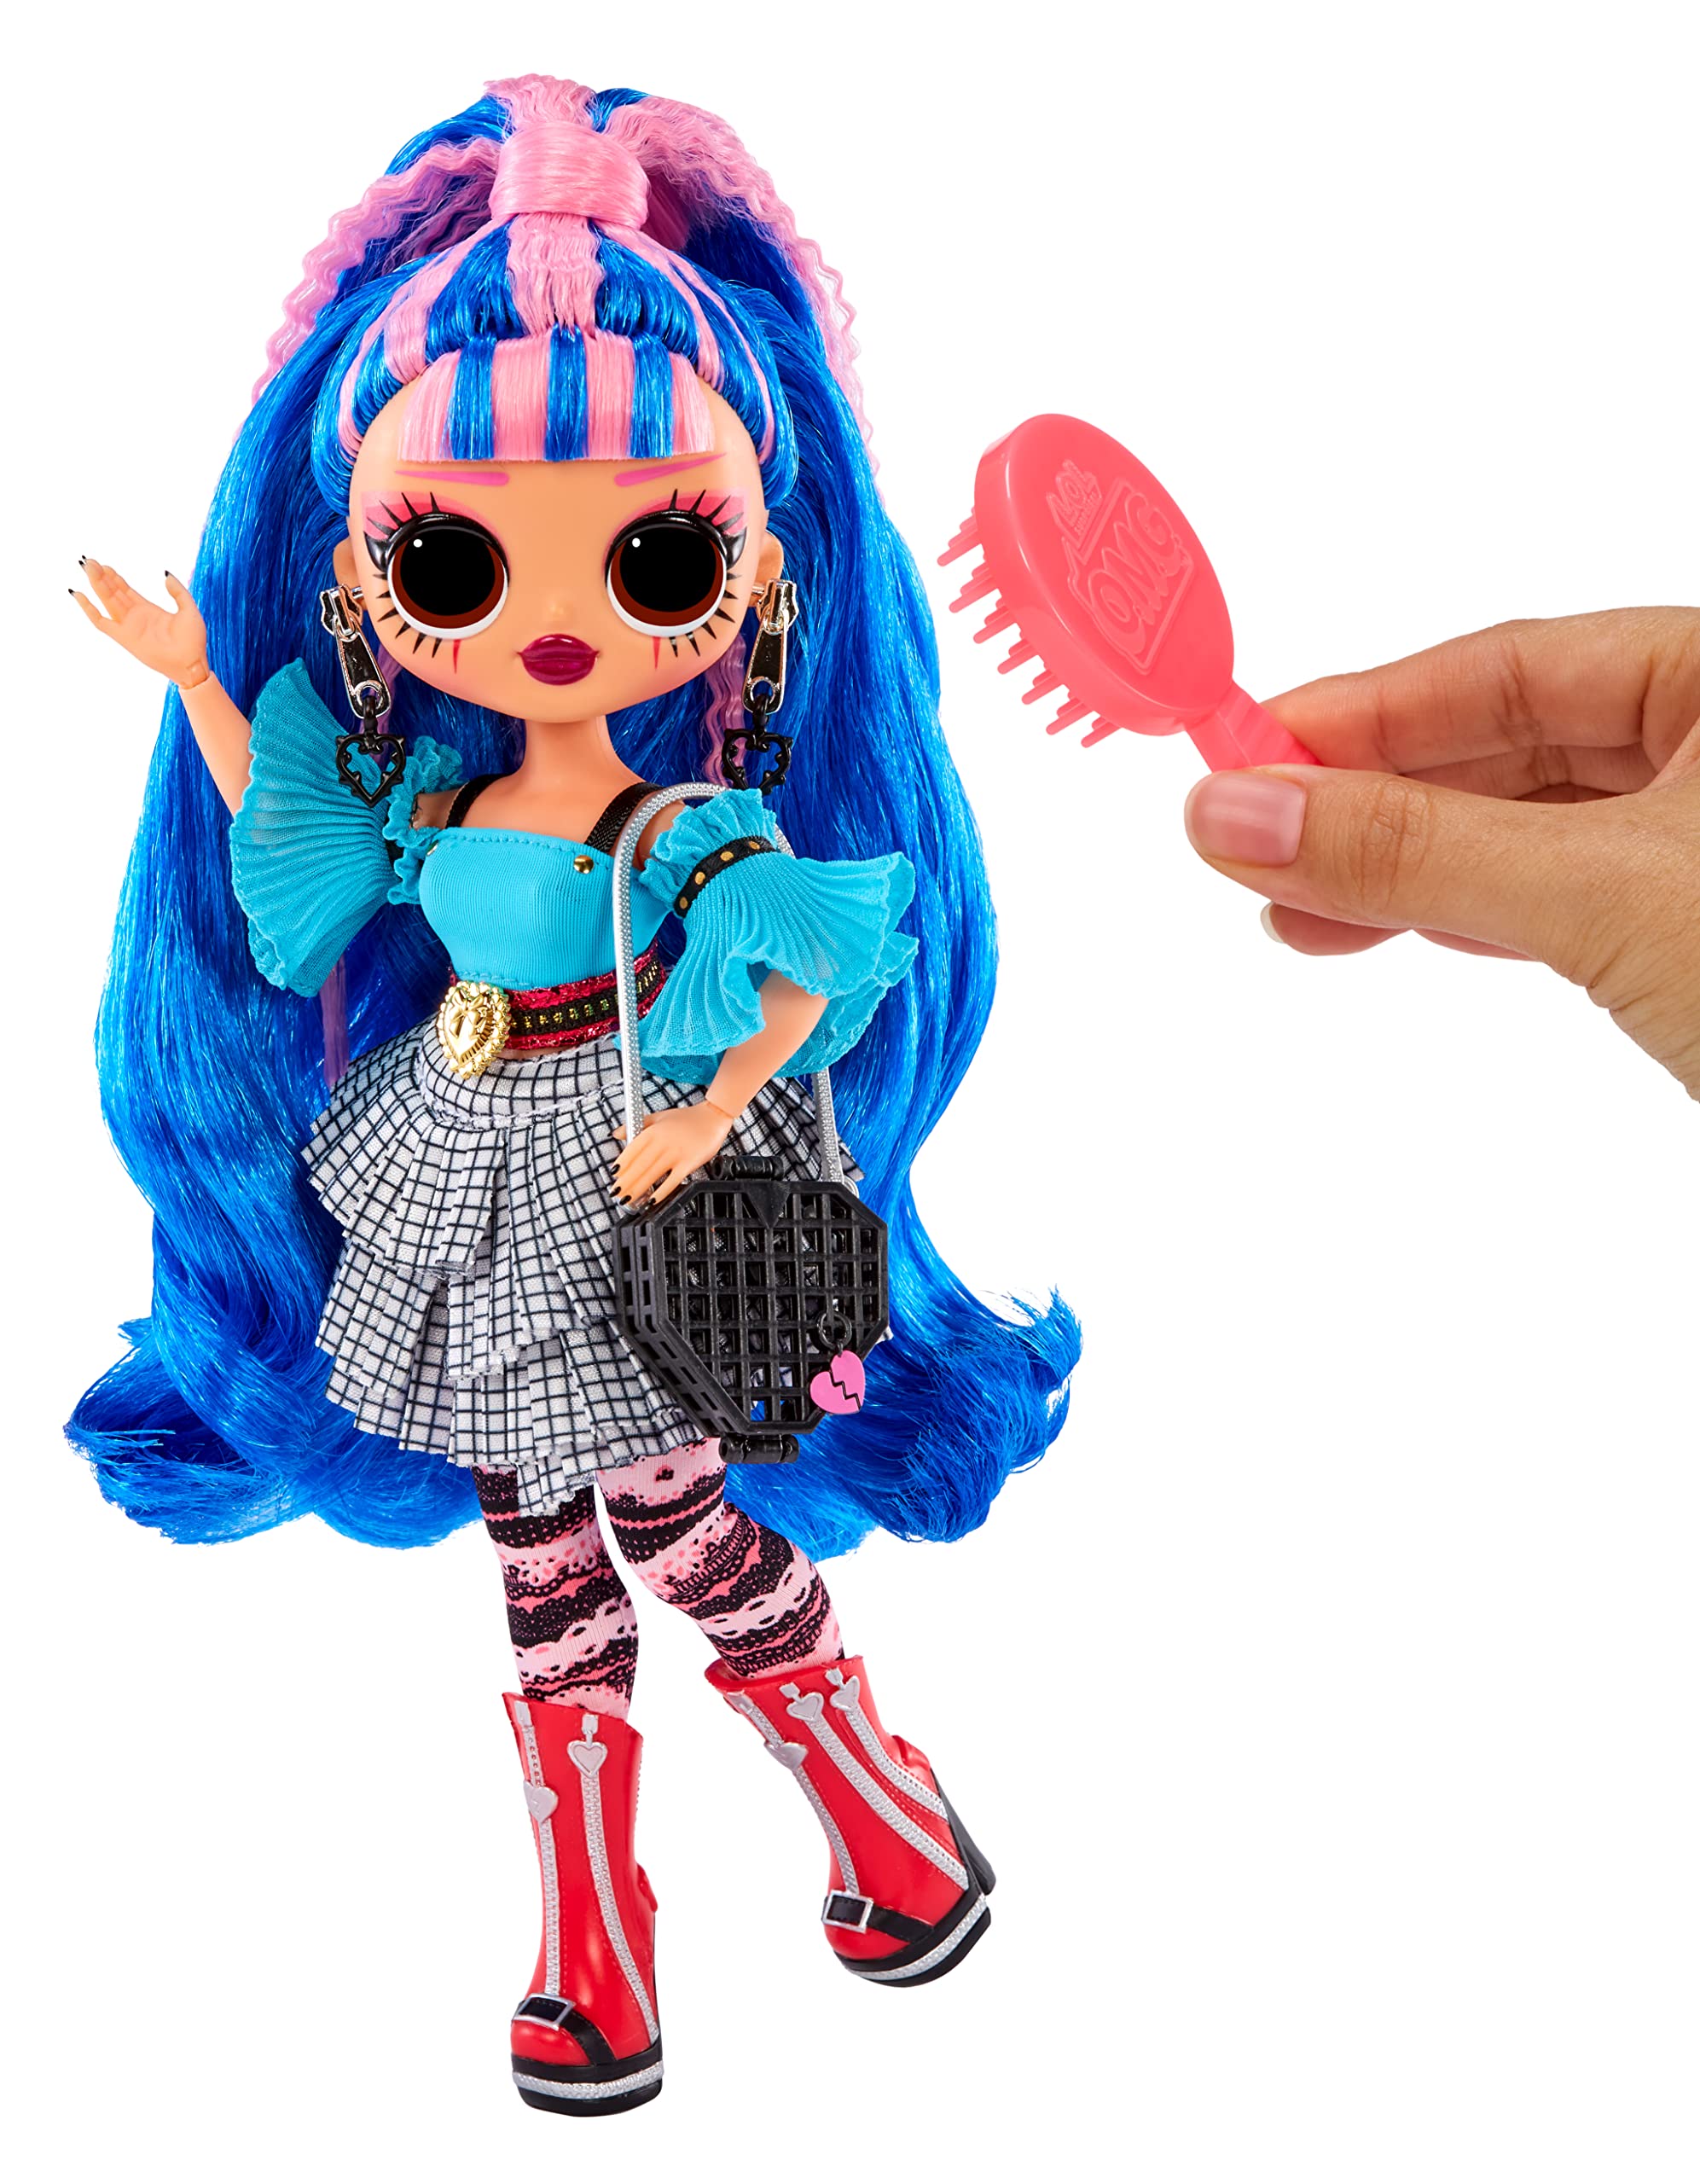 LOL OMG Queens Prism Doll with 20 Surprises Including Outfit and Accessories for Fashion Toy, Girls Ages 3 and up, 10-inch